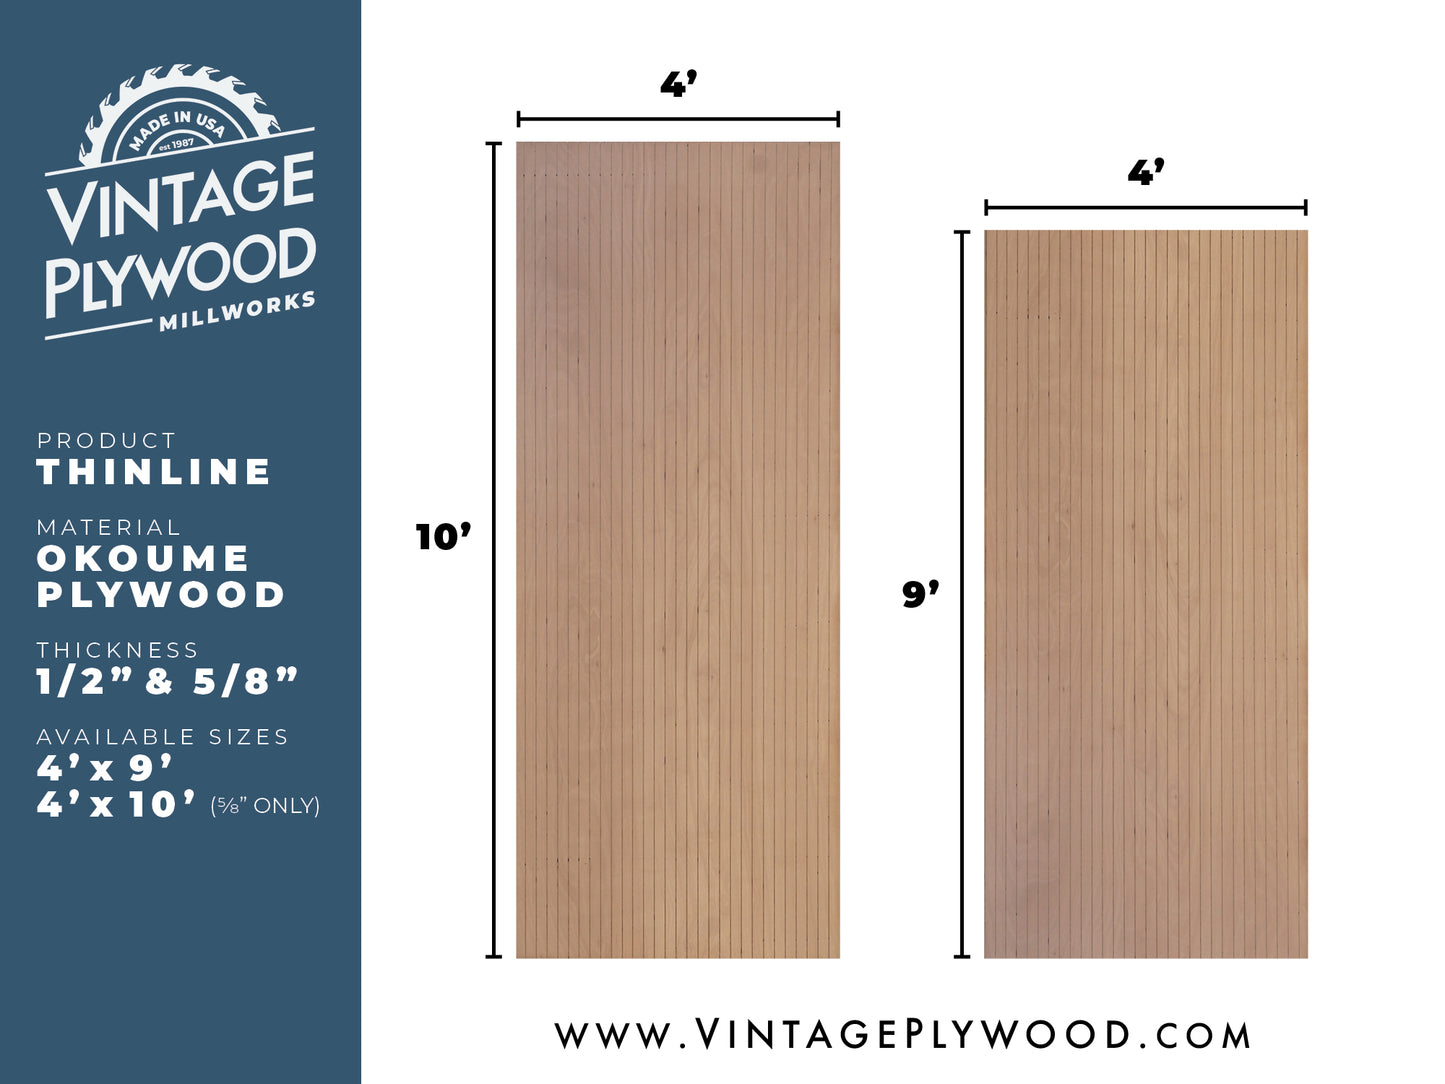 Spec sheet for Thinline patterned plywood consisting of a 1/8” grooves, 1⅝” on center, commonly used as siding and paneling on Eichler homes and other mid-century modern design